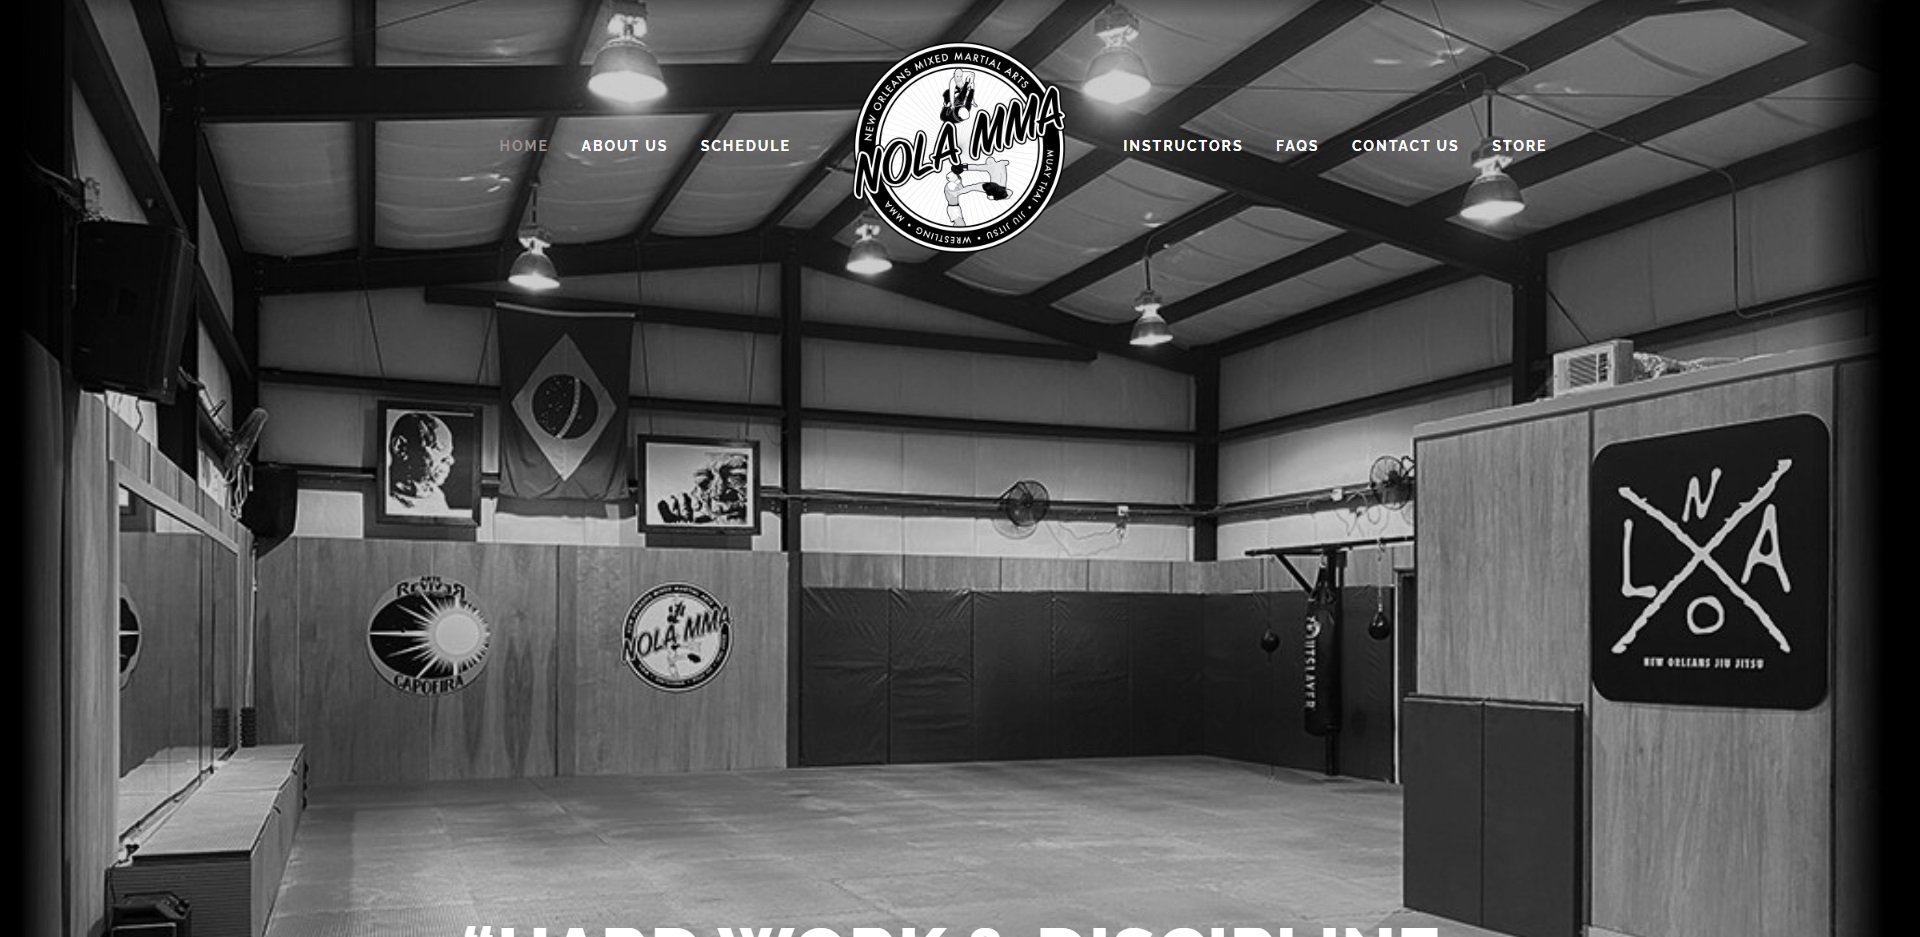 The Best Martial Arts Classes in New Orleans, LA